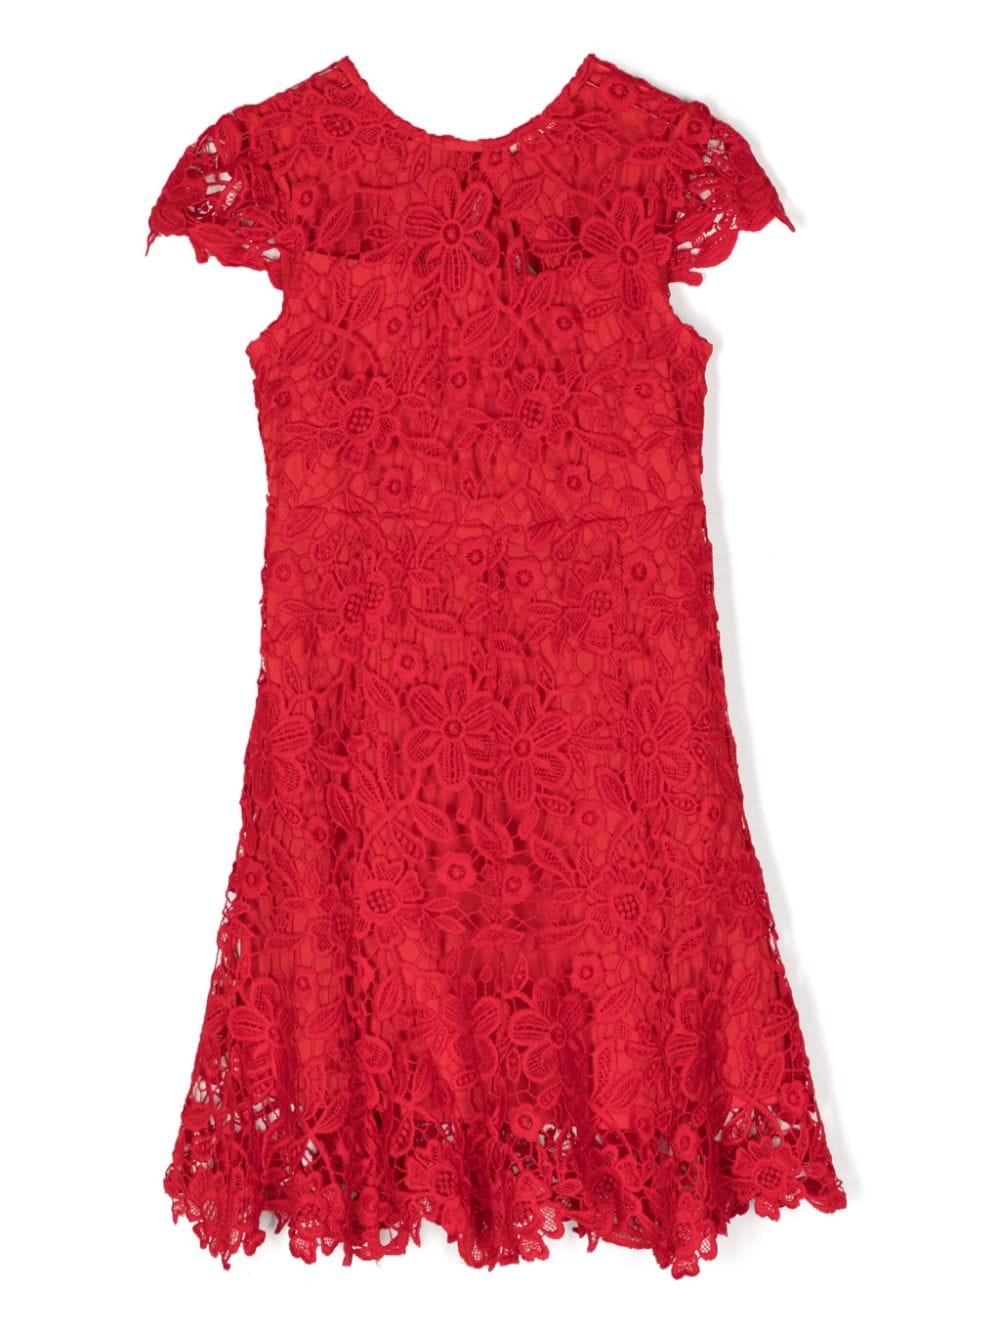 Marlo Kids' Holly Jolly Floral-lace Minidress In Red